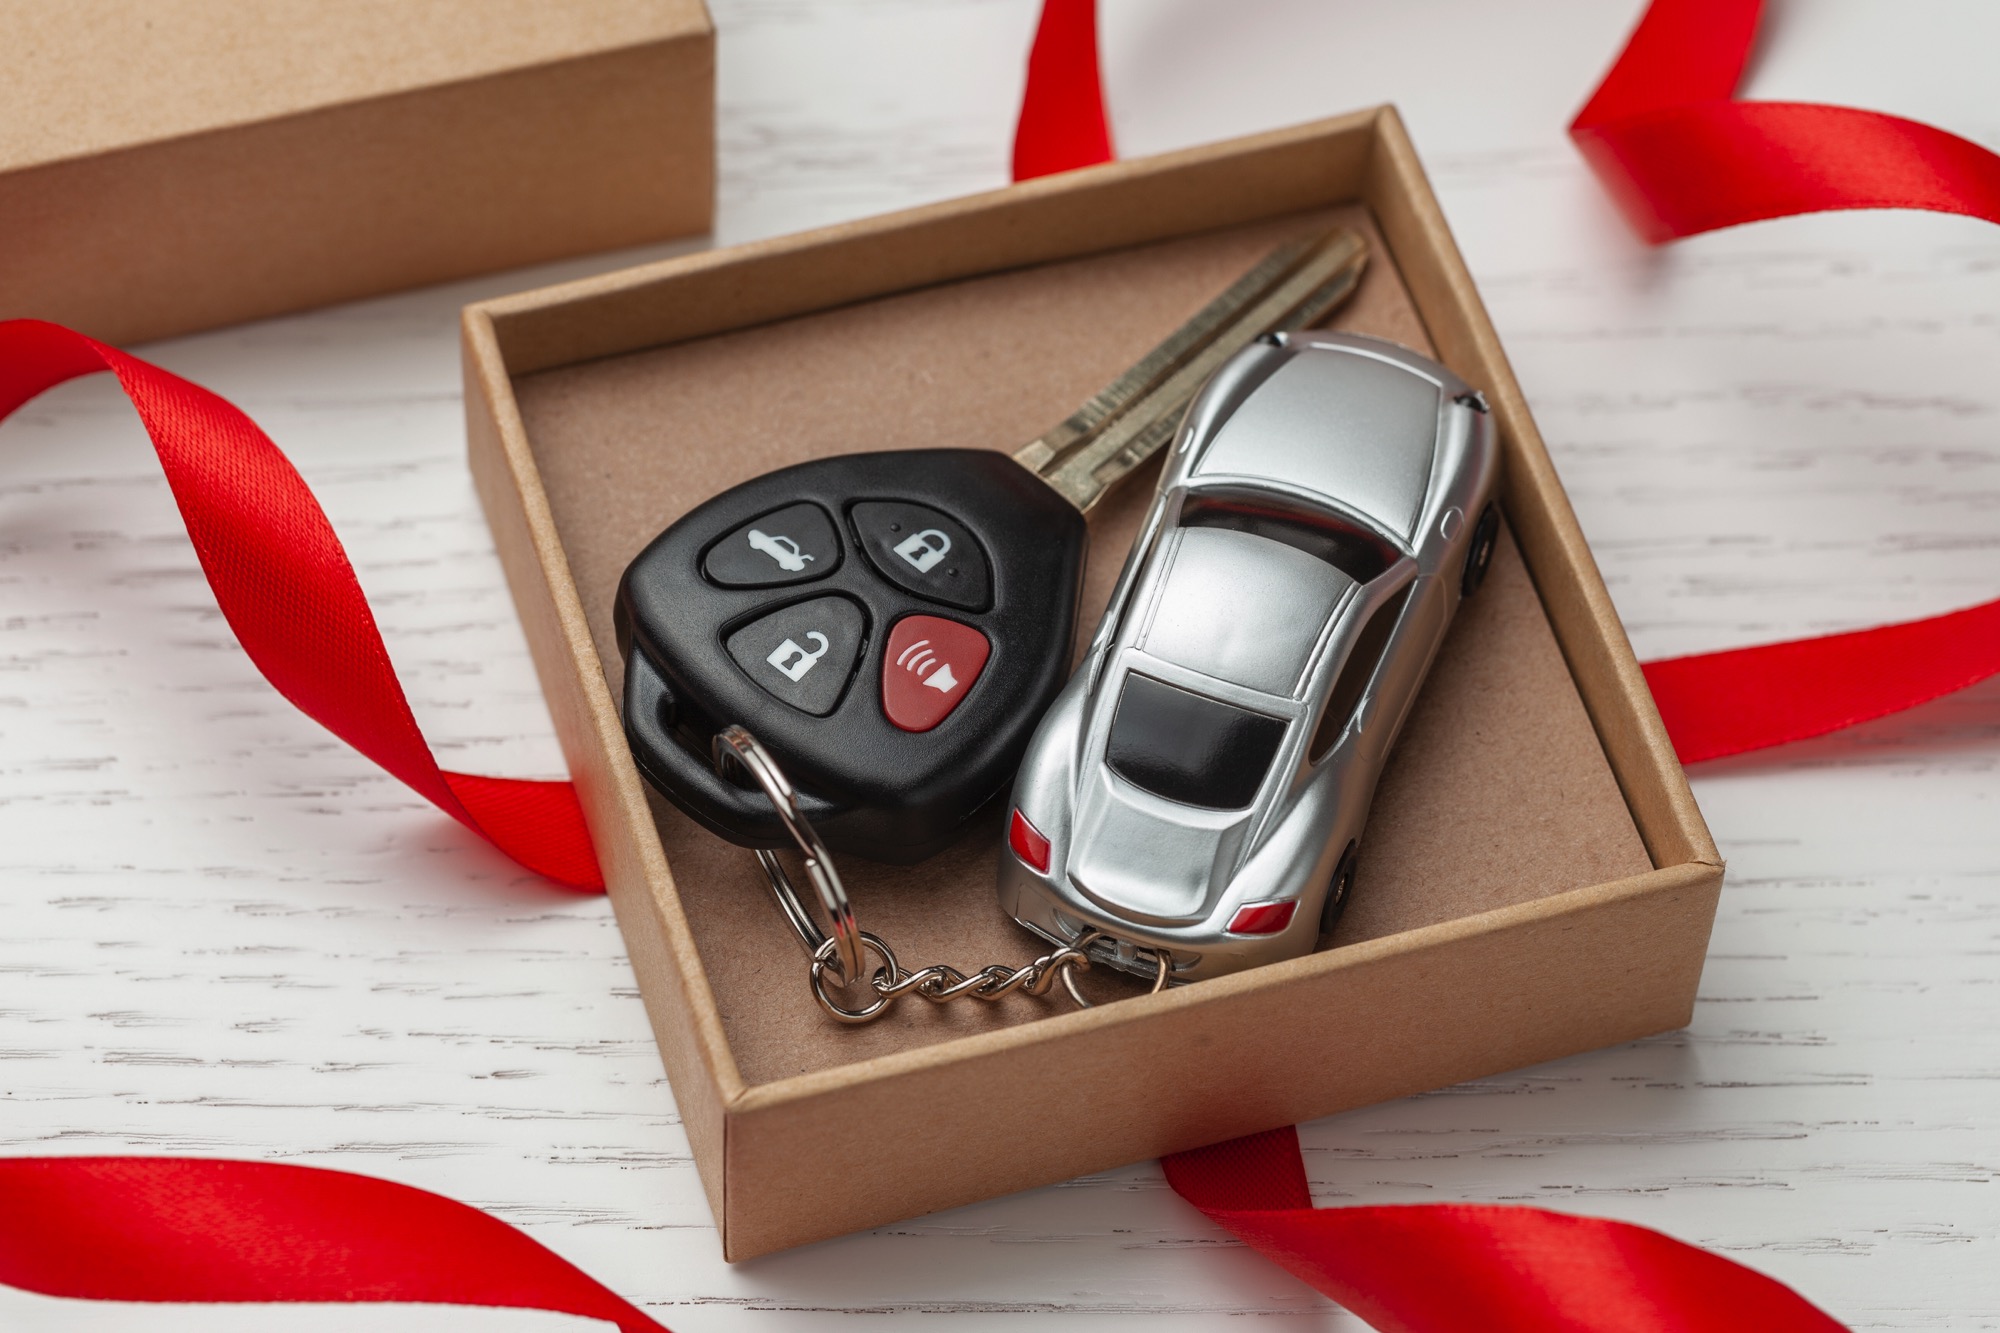 AdobeStock 252394108 - Where To Look For Your Lost Automotive Keys